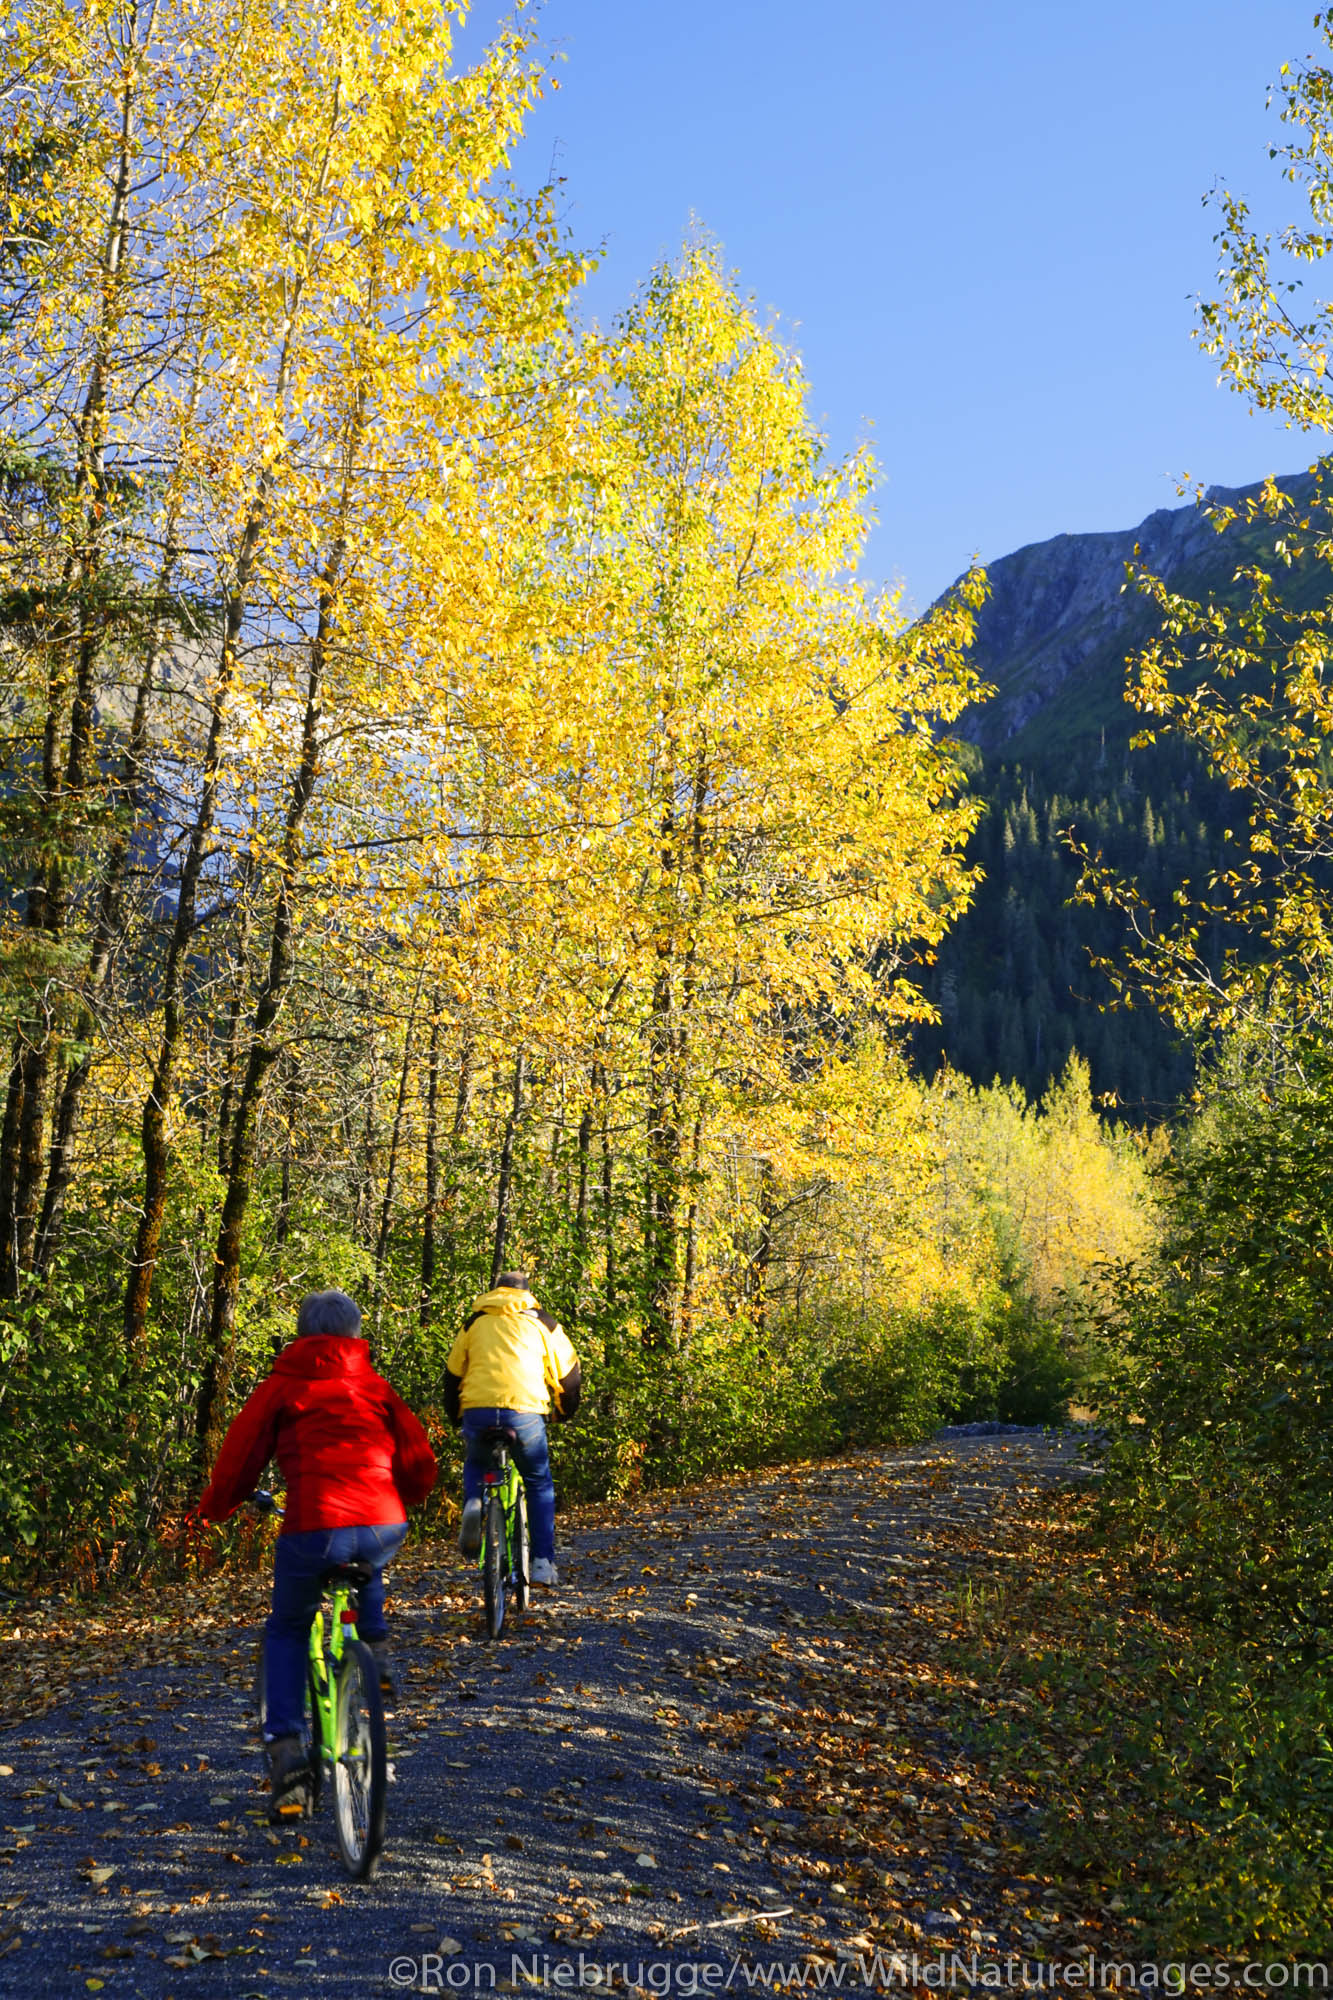 Biking on The Trail of Blue Ice in the Portage Valley Moose Flats area, Chugach National Forest, Alaska. (MR)